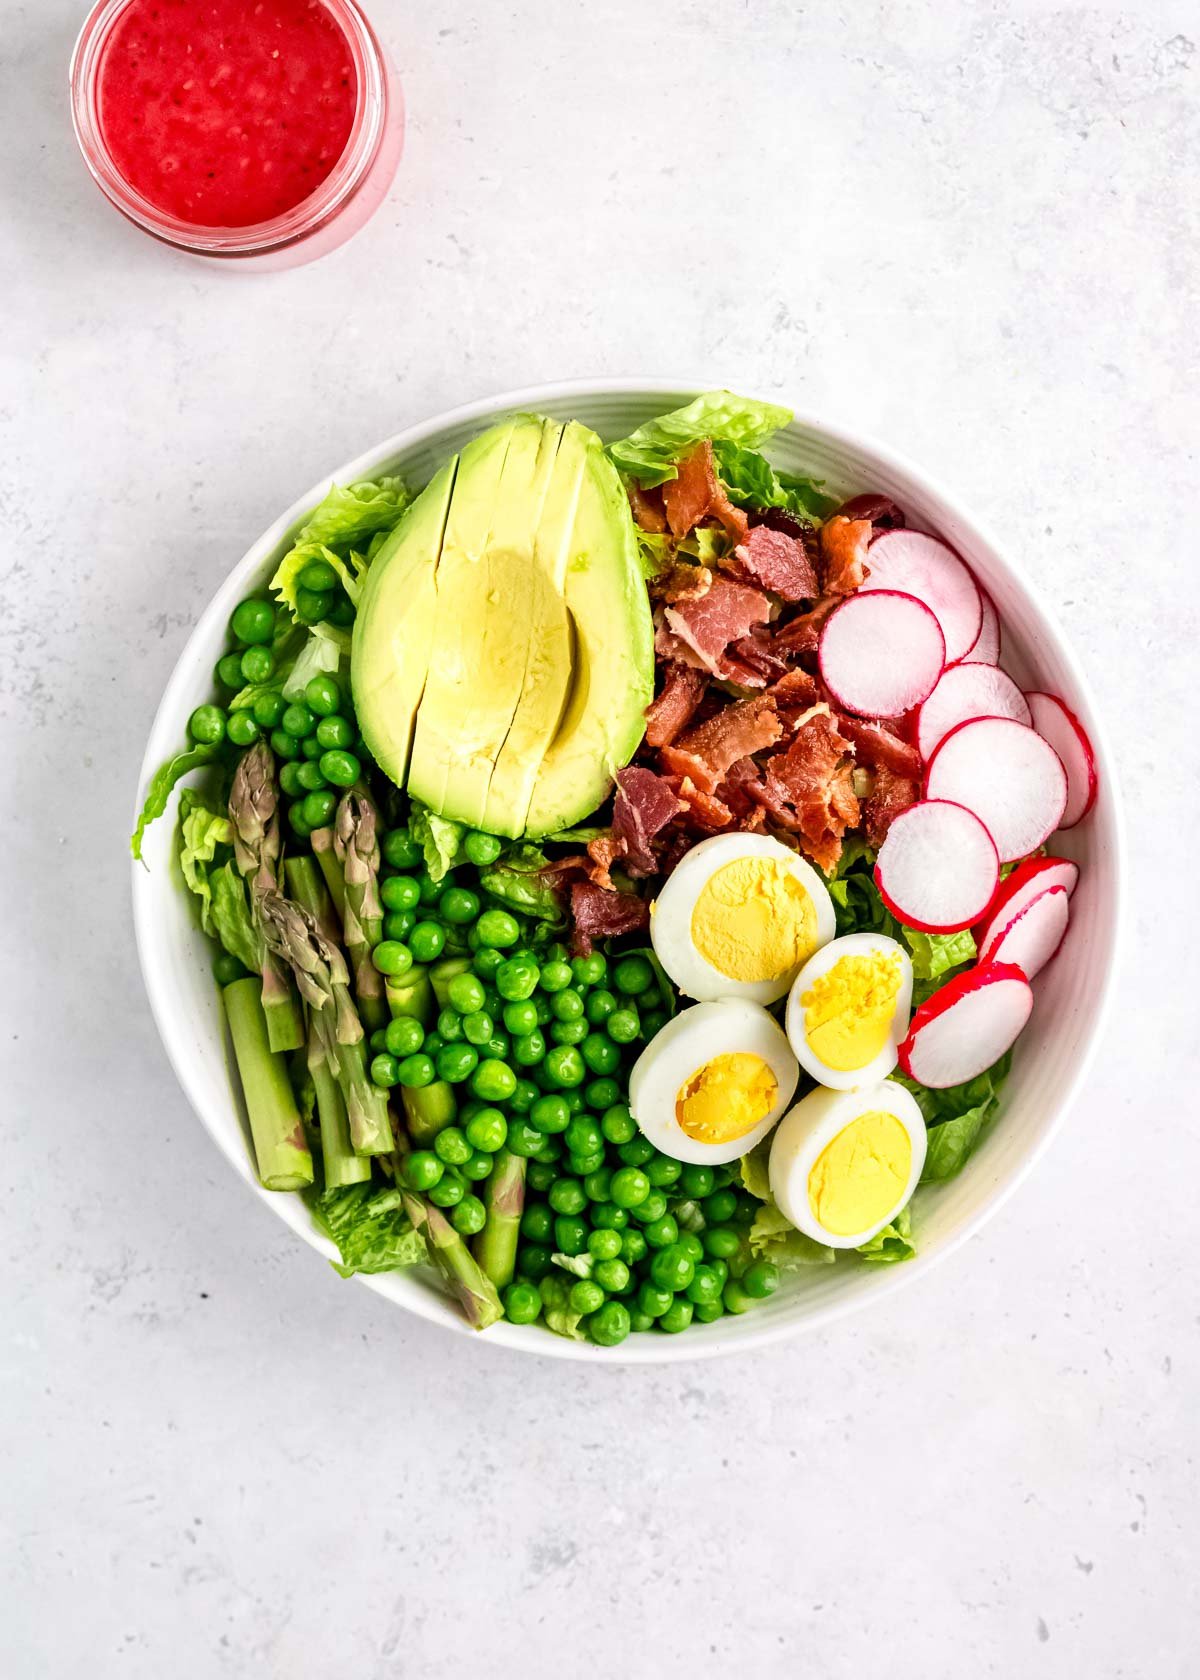 asparagus, avocado, peas, bacon, radishes, eggs, and lettuce in white bowl